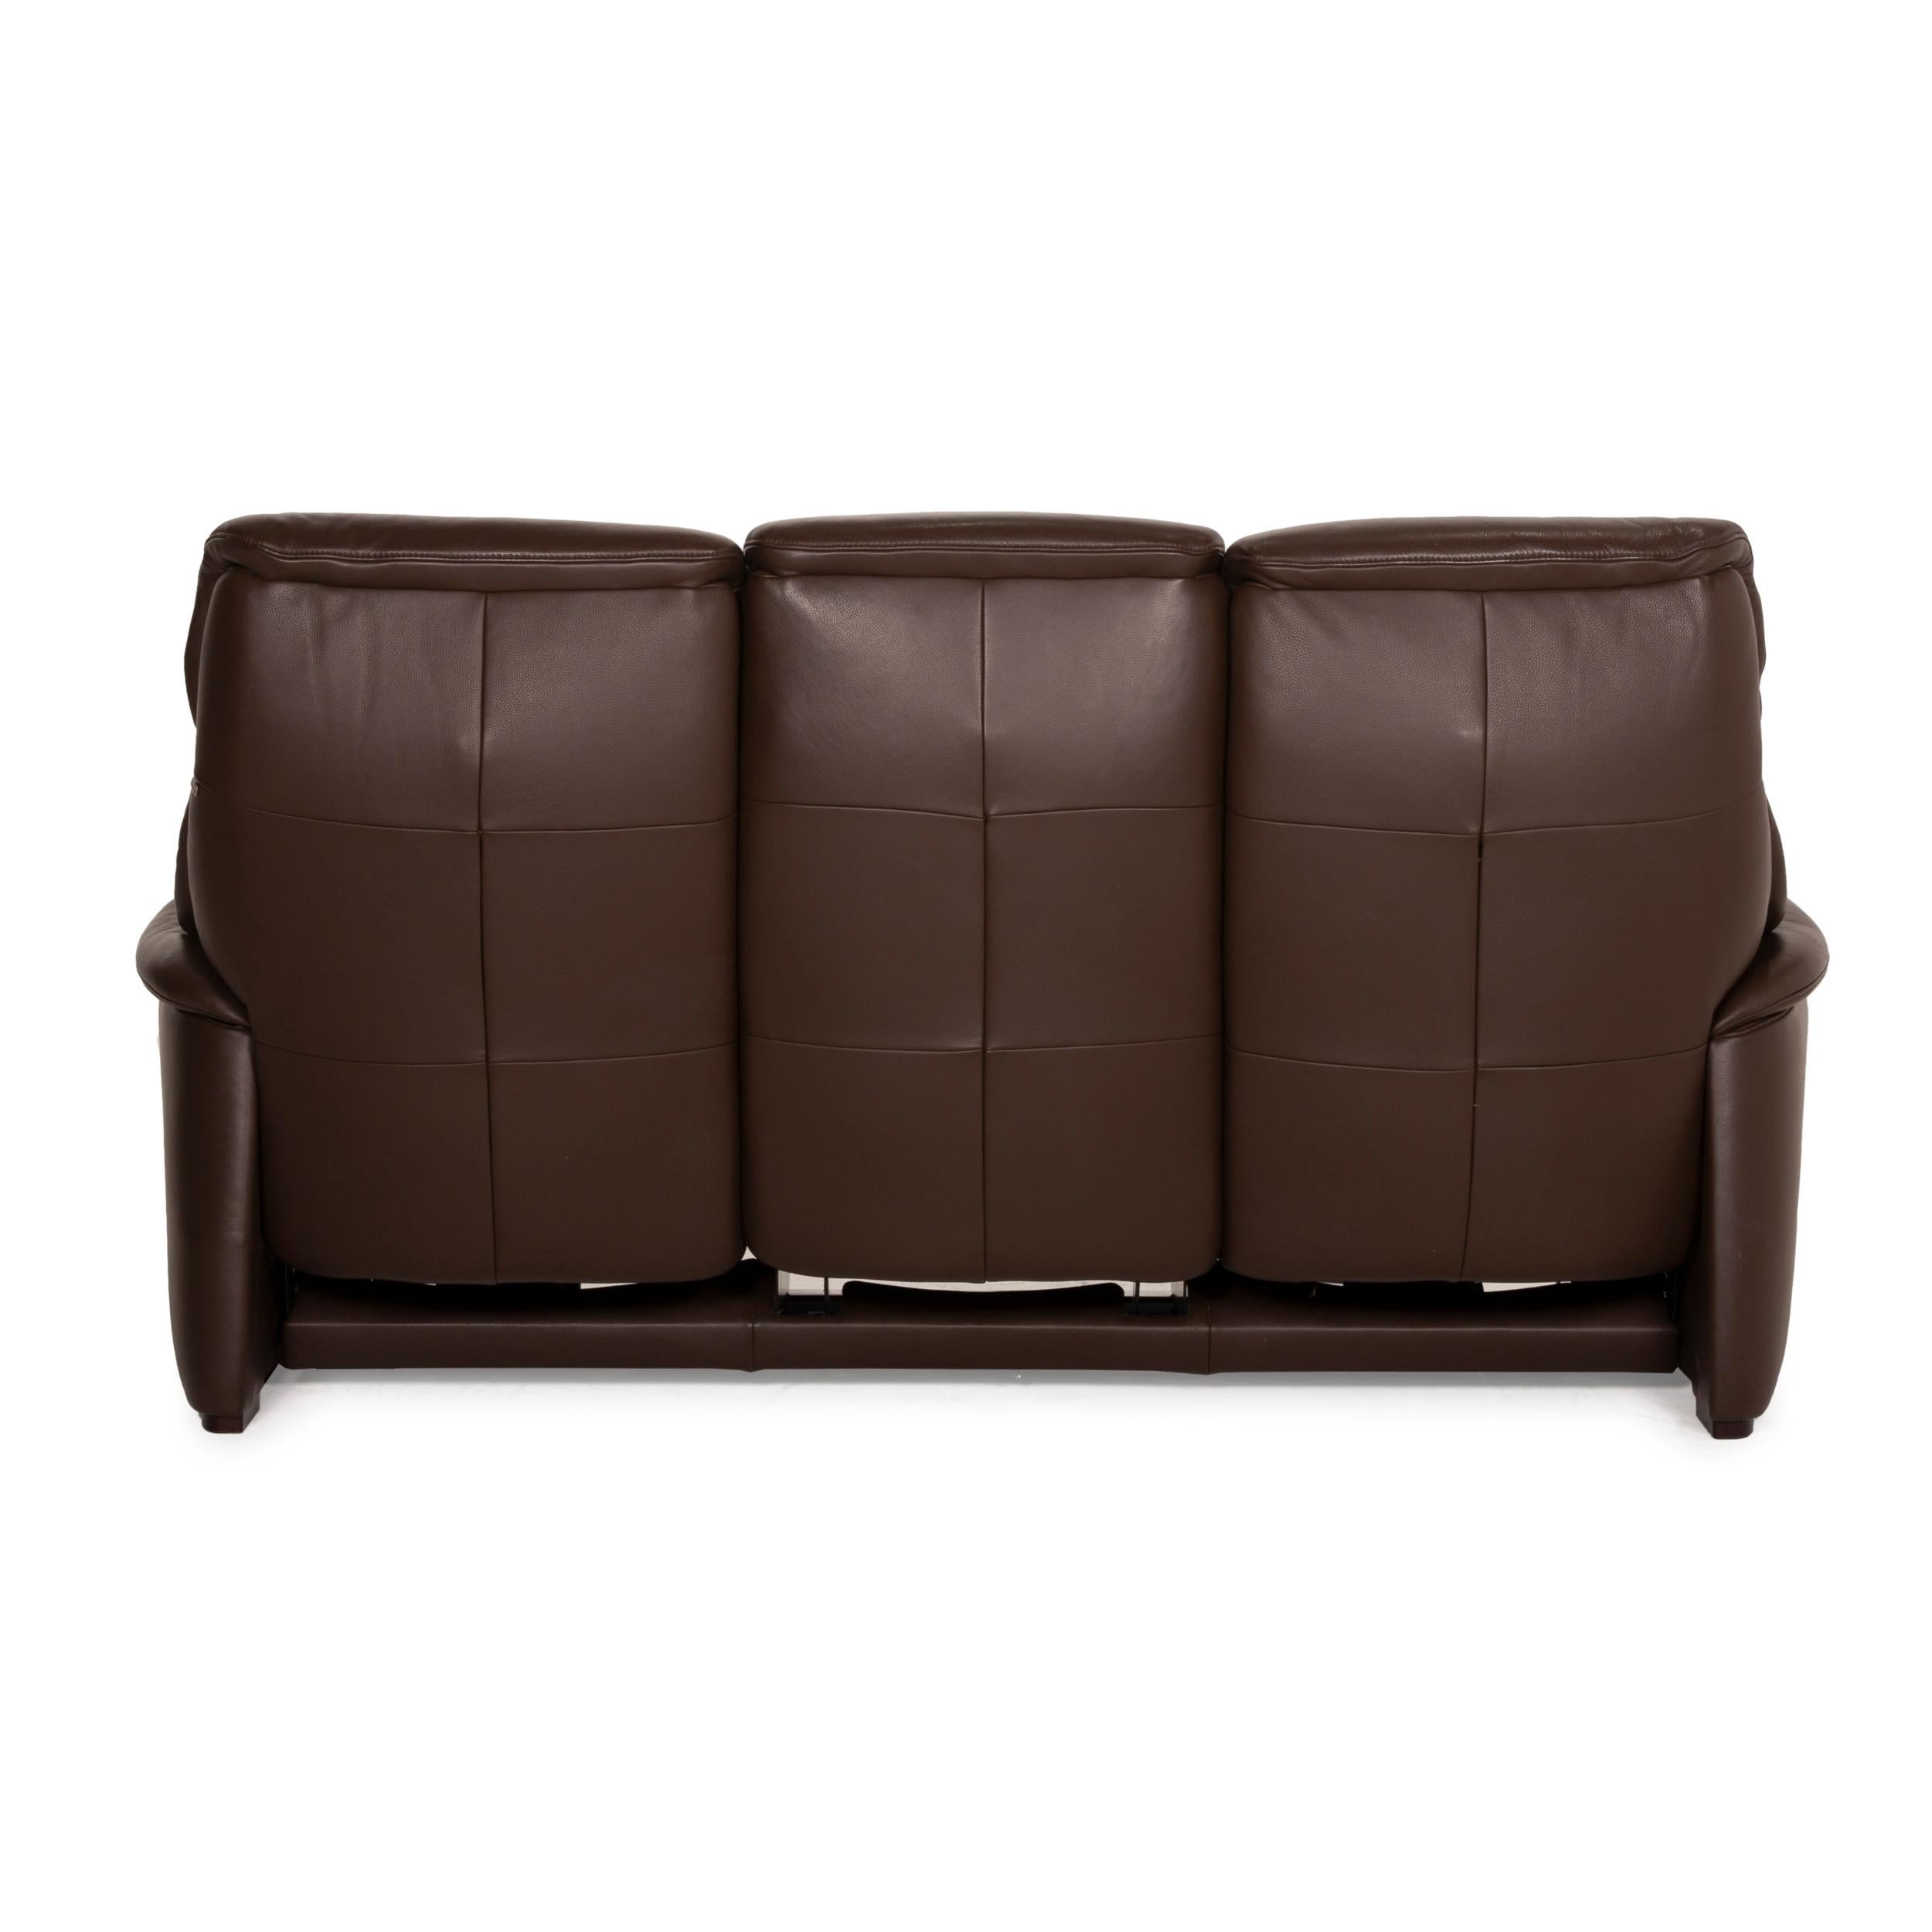 Hukla Nevada Leather Sofa Brown Three-Seater Electric Relaxation Function Dark 4